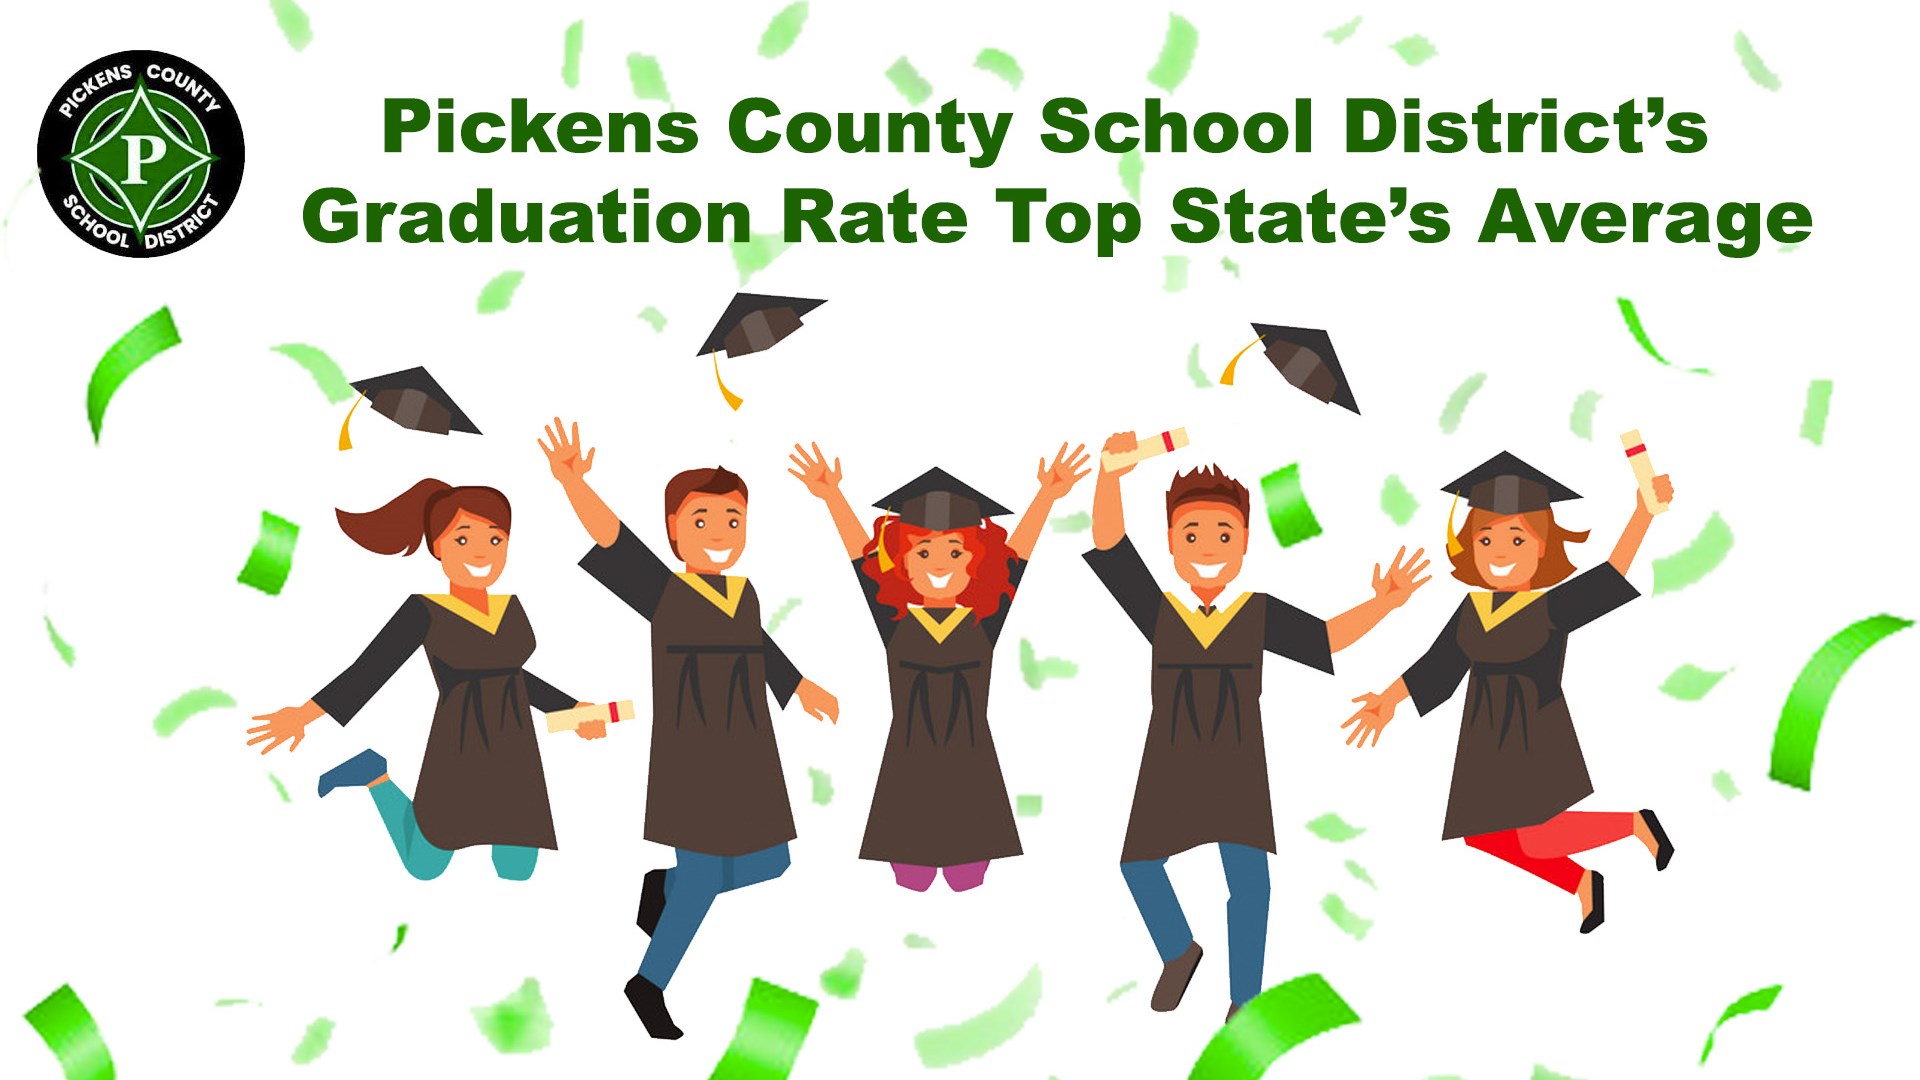 Pickens County School District’s Graduation Rate Top State’s Average